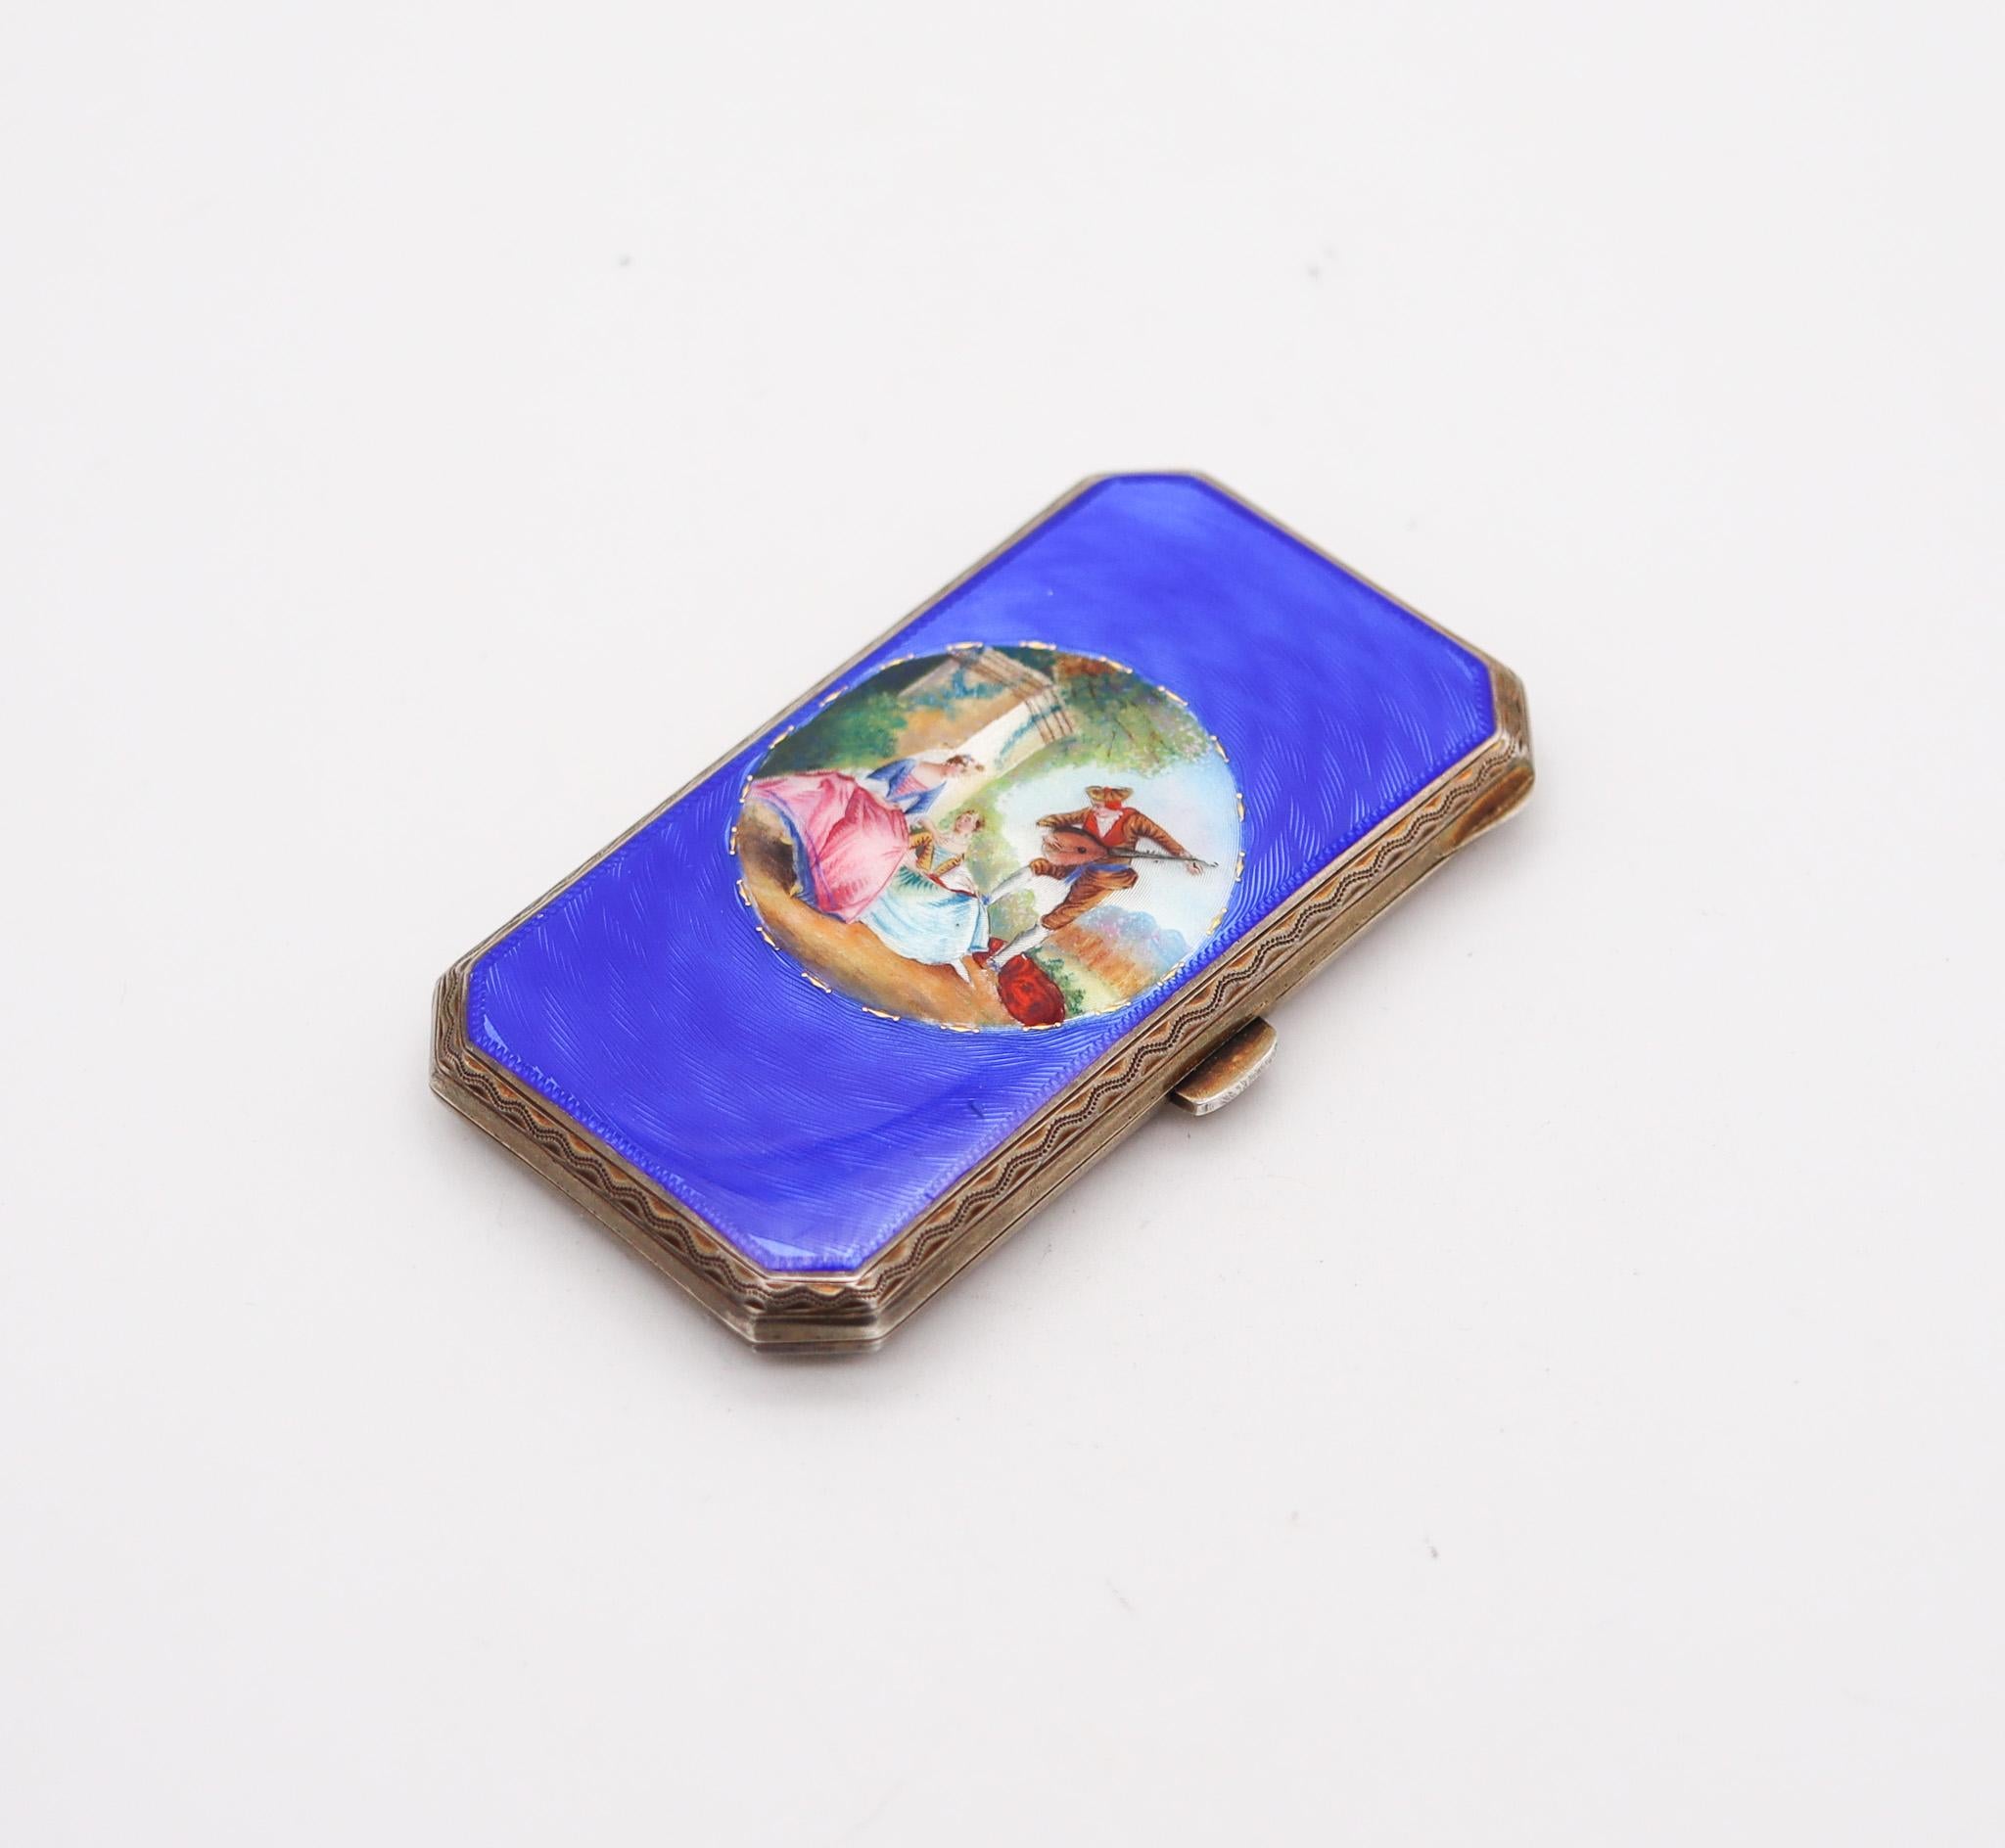 A guilloche enameled round box with flowers

Beautiful enameled box, created in Pforzheim Germany, during the art deco period back in the 1915-20 This beautiful box was carefully crafted with impeccable details in solid .935/.999 standard silver